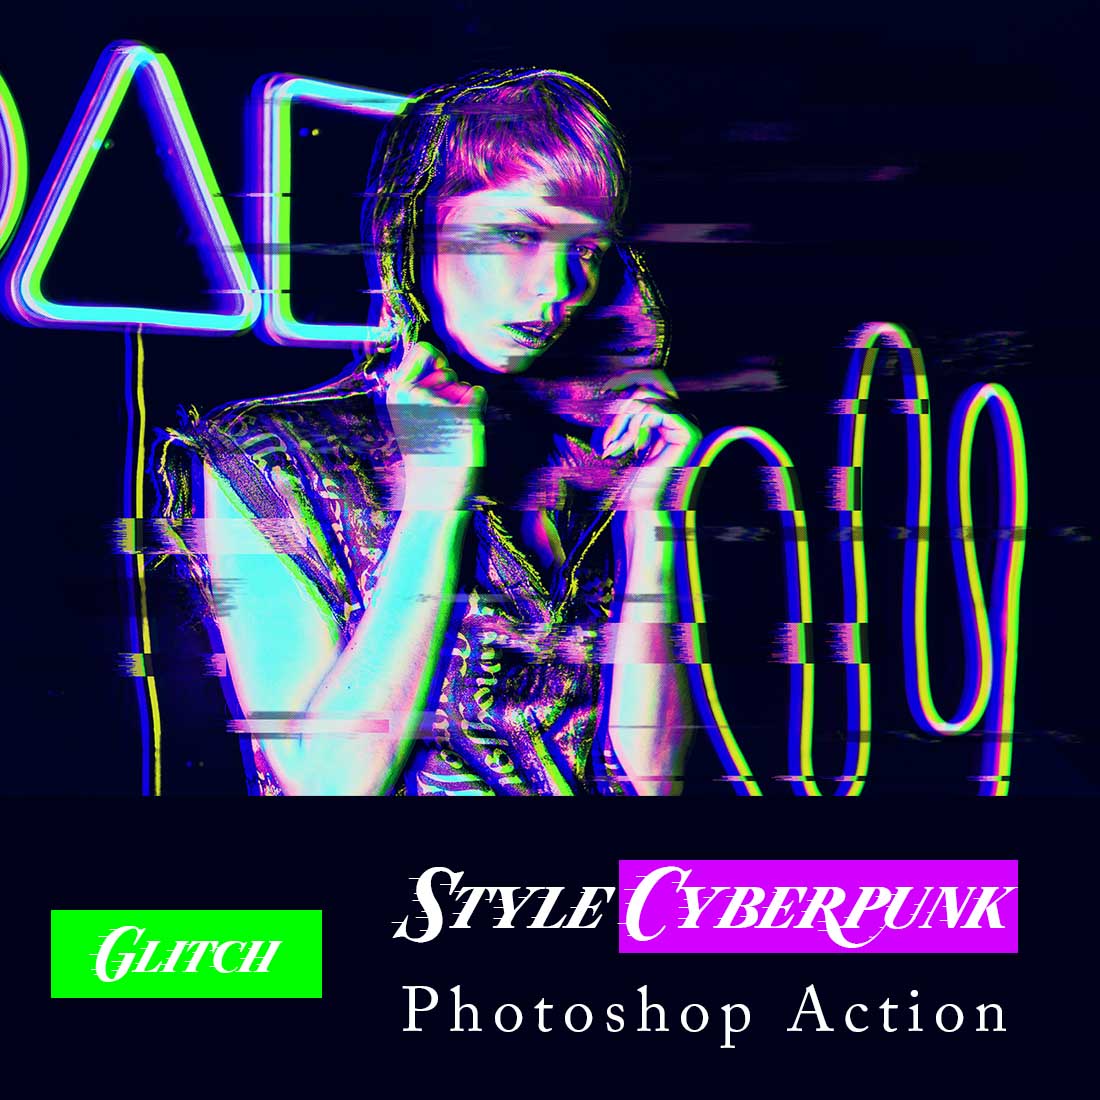 Glitch Style Cyberpunk Photoshop Action cover image.